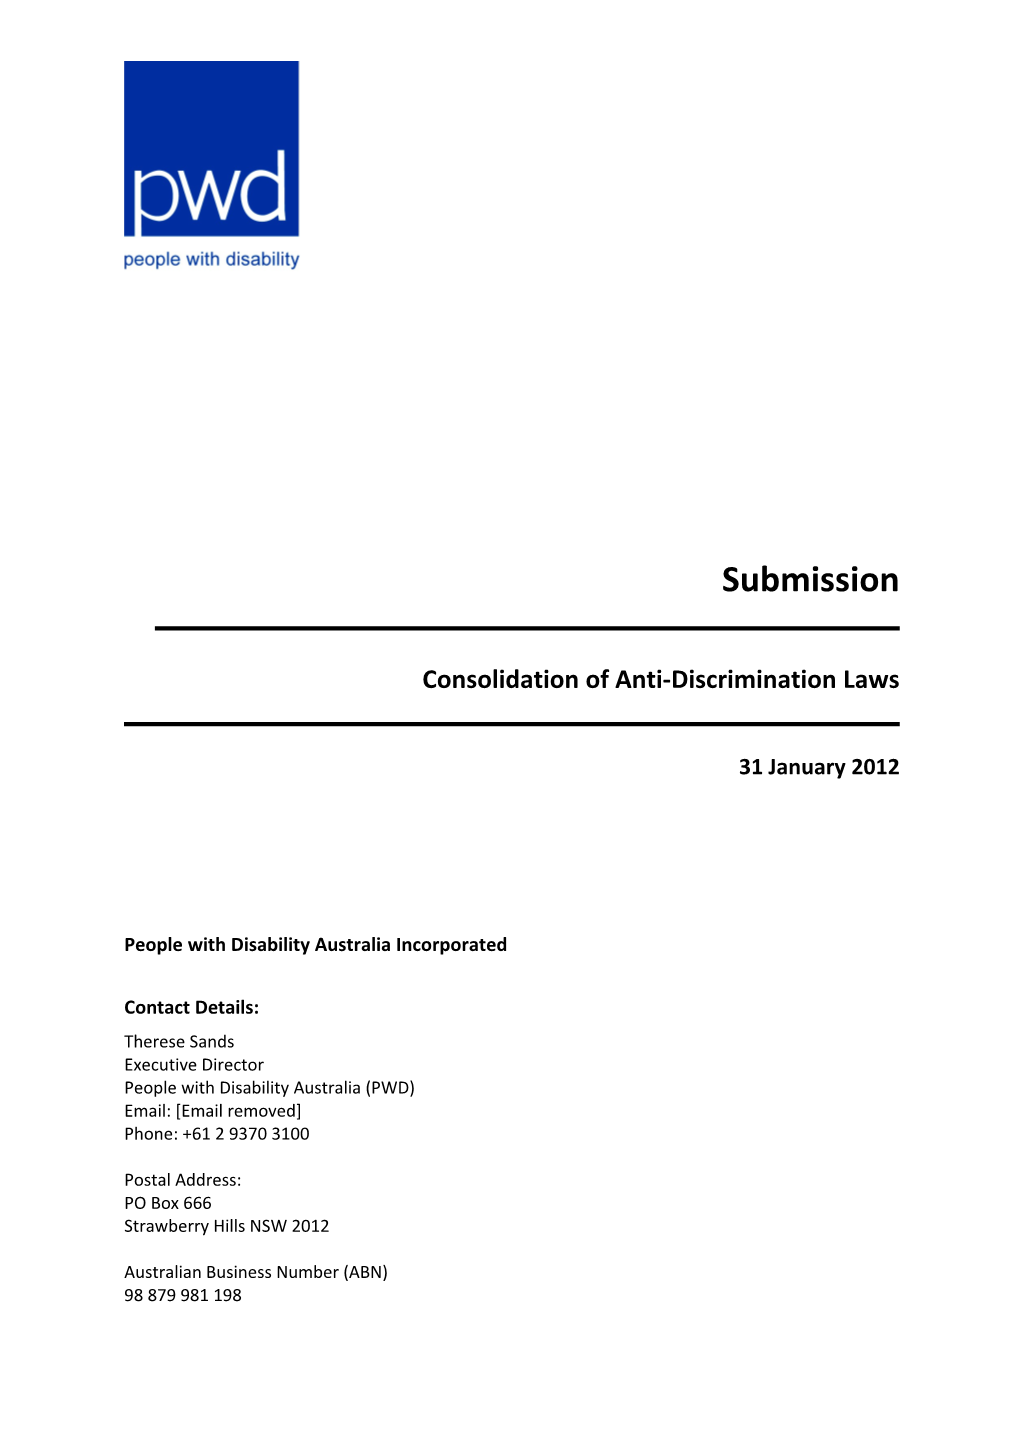 Submission on the Consolidation of Commonwealth Anti-Discrimination Laws - People With